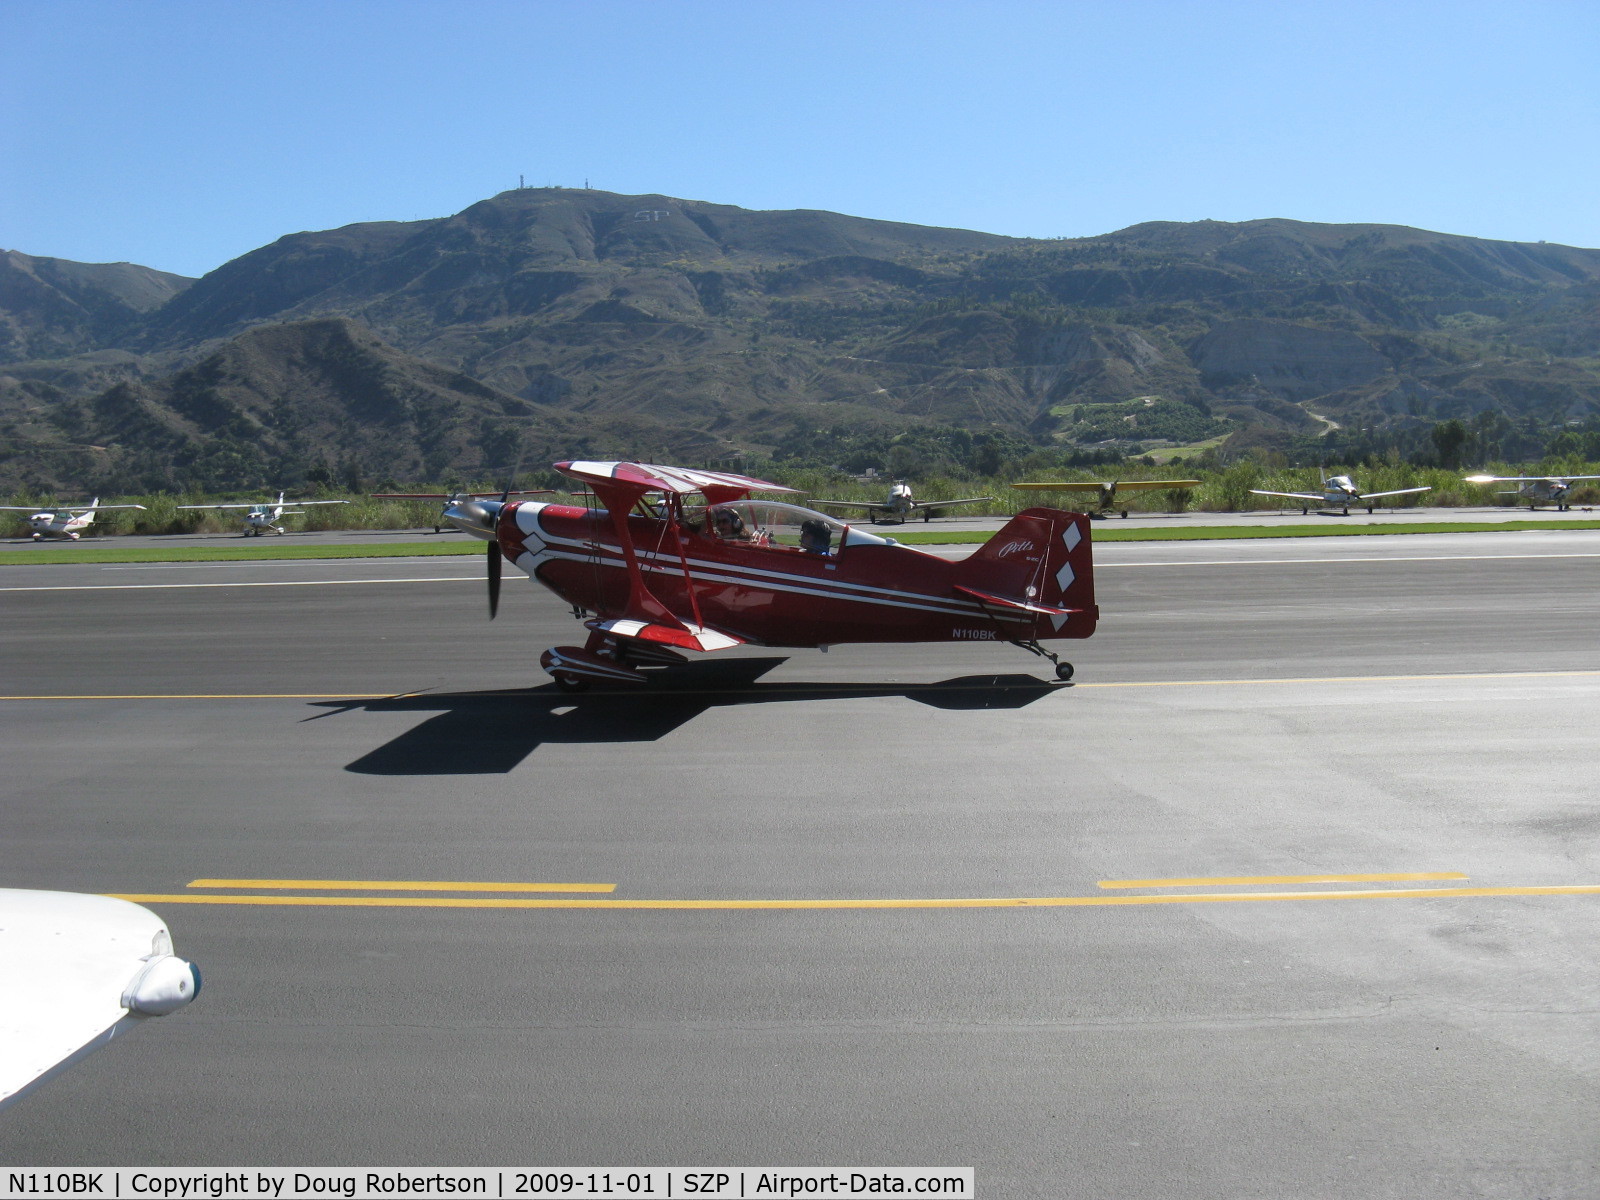 N110BK, 2007 Aviat Pitts S-2C Special C/N 6077, 2007 Aviat PITTS S-2C, Lycoming AEIO-540-D4A5 260 Hp, taxi